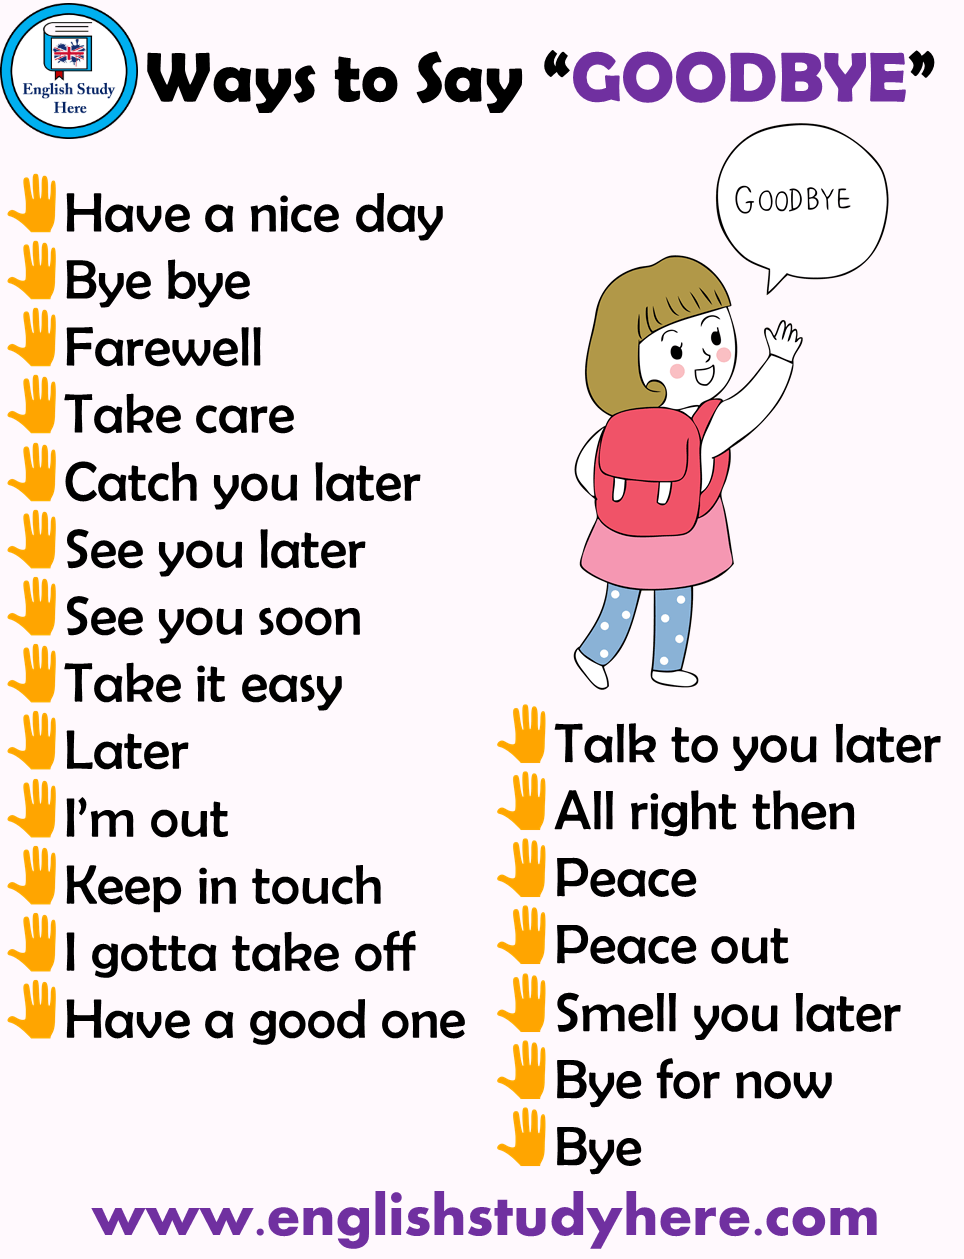 Ways to Say GOODBYE in English - English Study Here